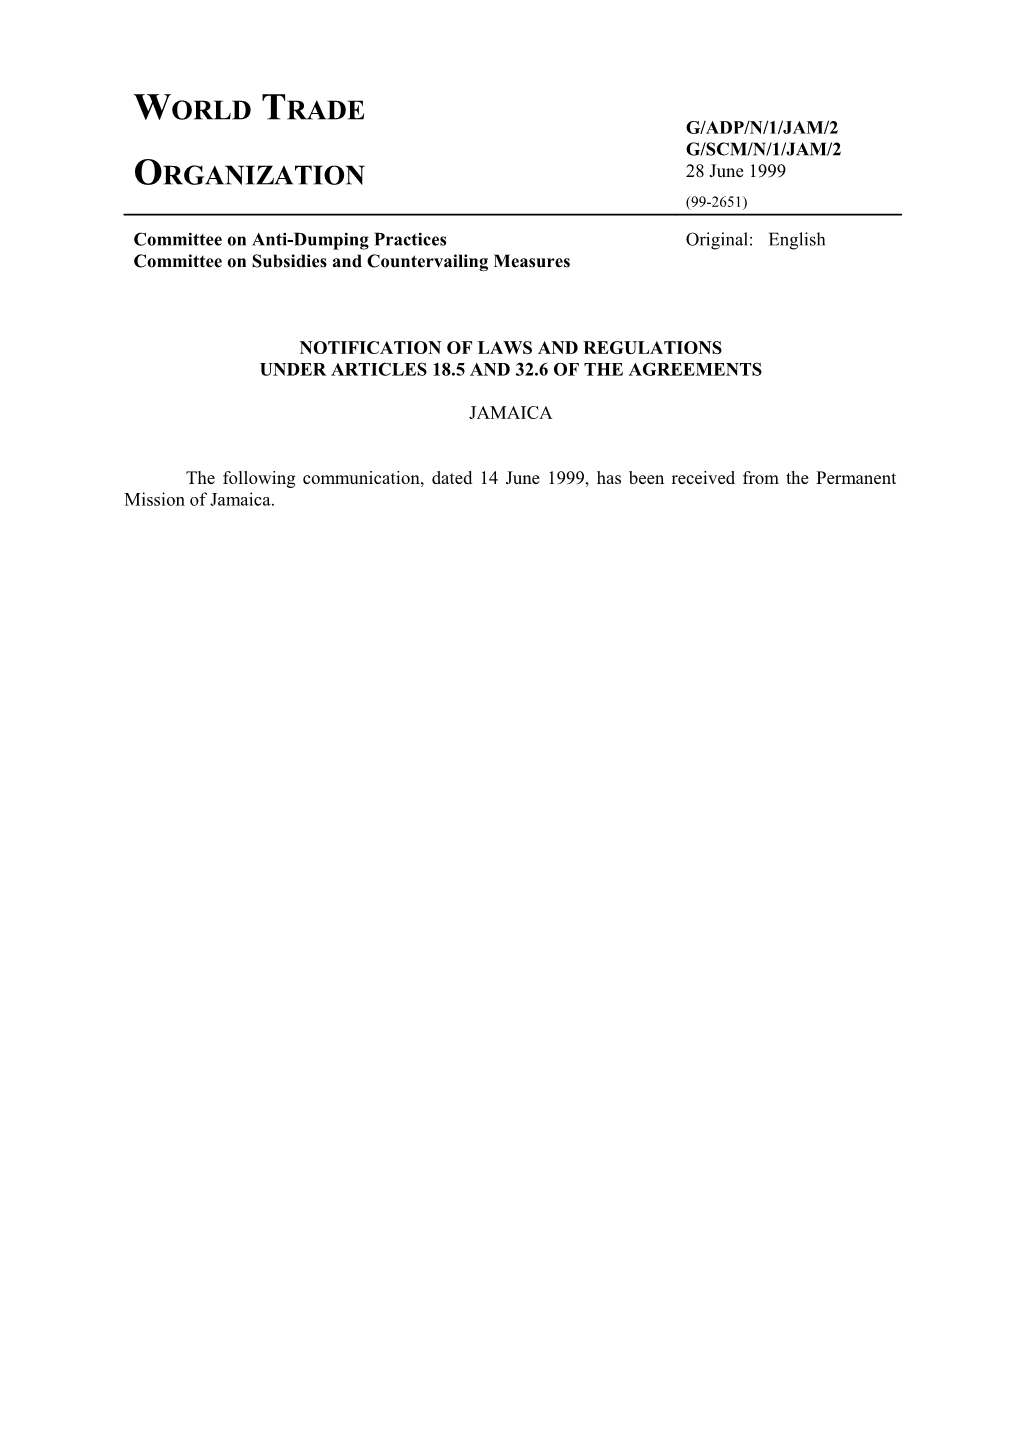 Notification of Laws and Regulations s1